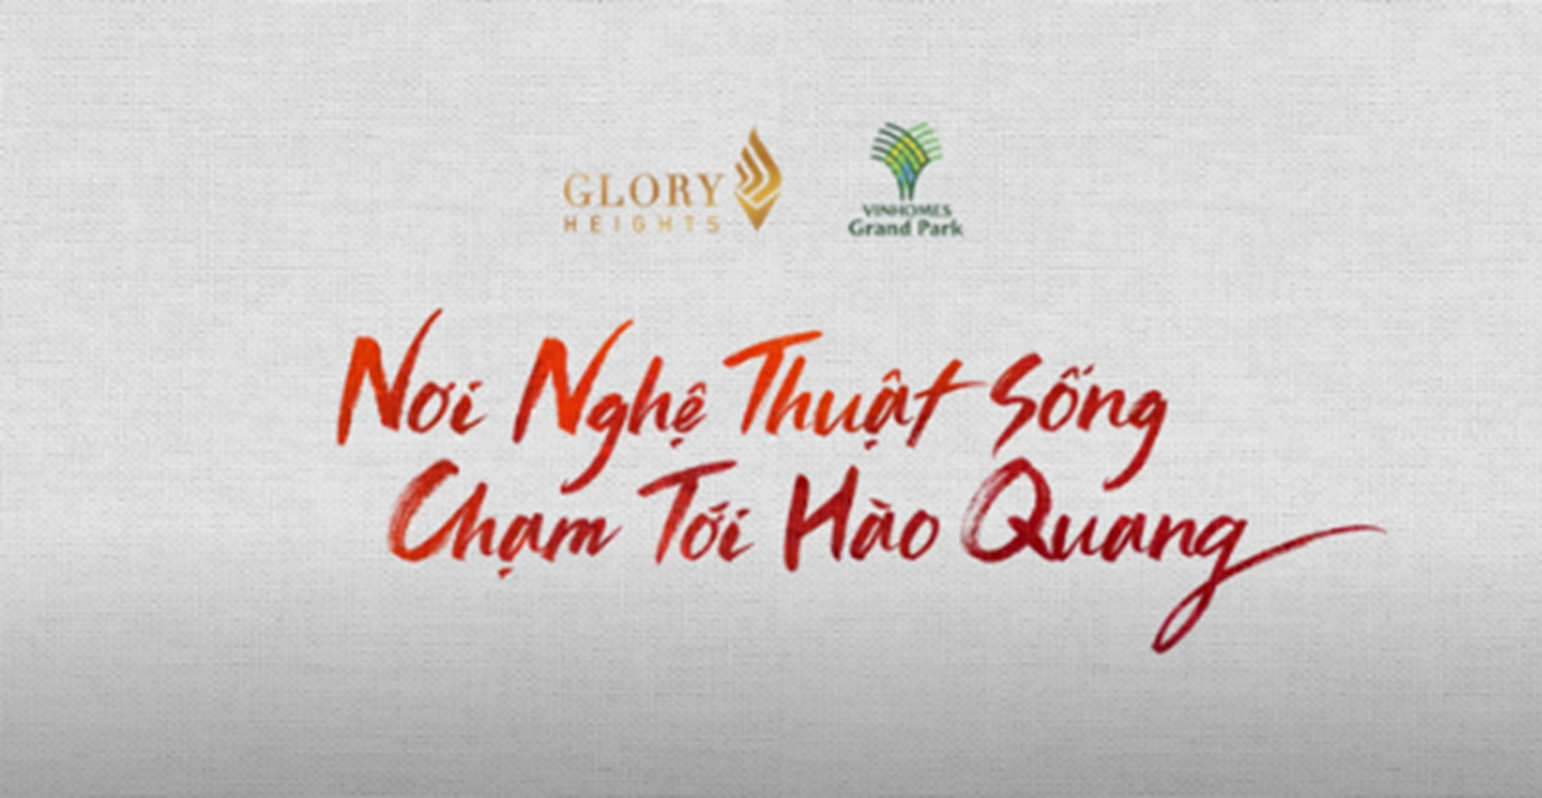 vinhomes to chuc trien lam tranh glory to glory khoi nguon chat song